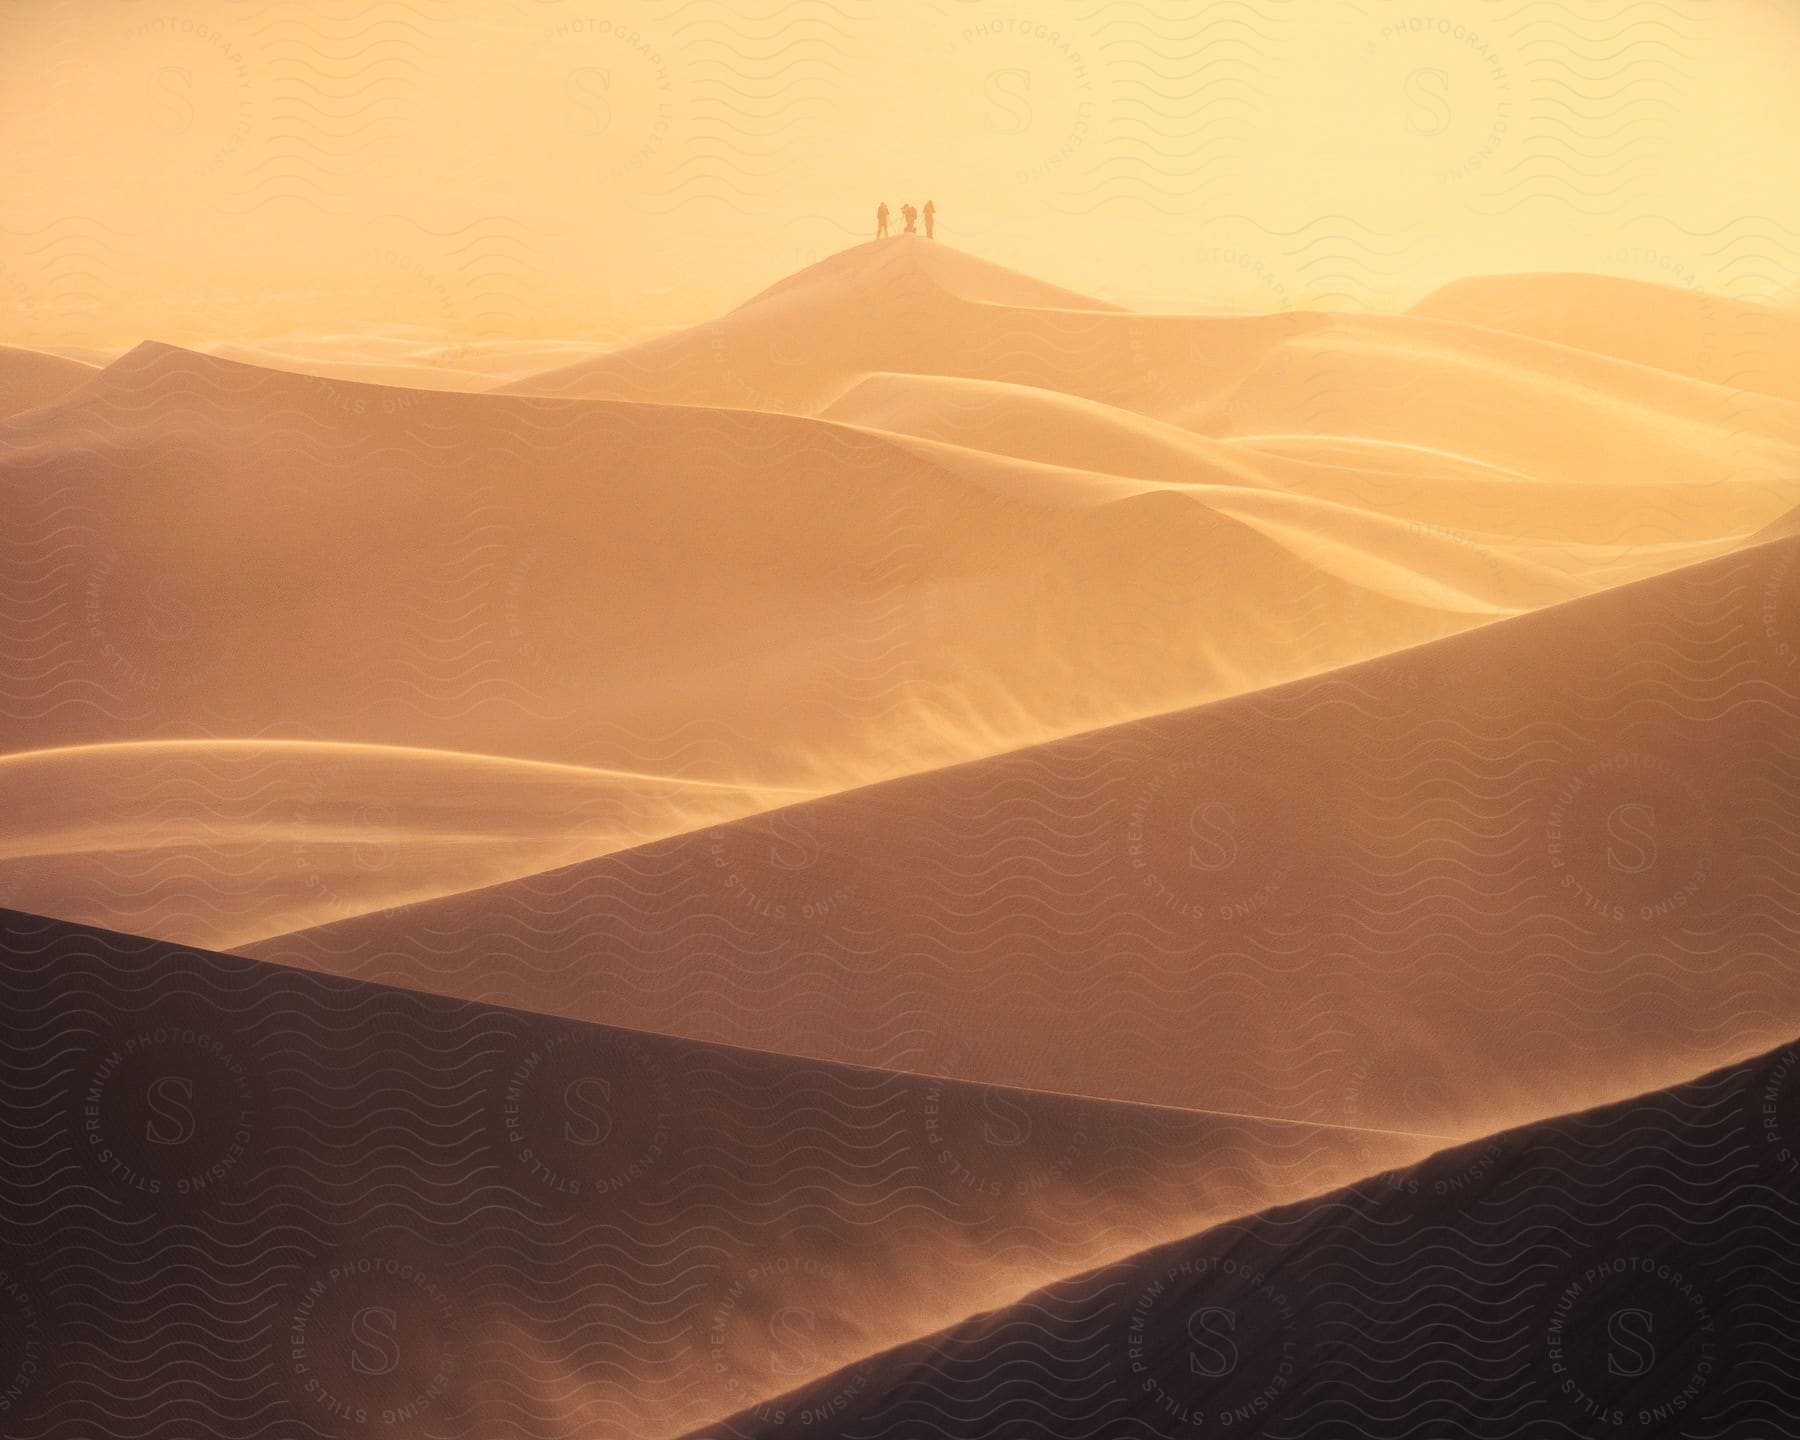 Three figures were spotted on a tall sand dune in the distance on a windy day with blowing sand, with a yellow sky in the background.